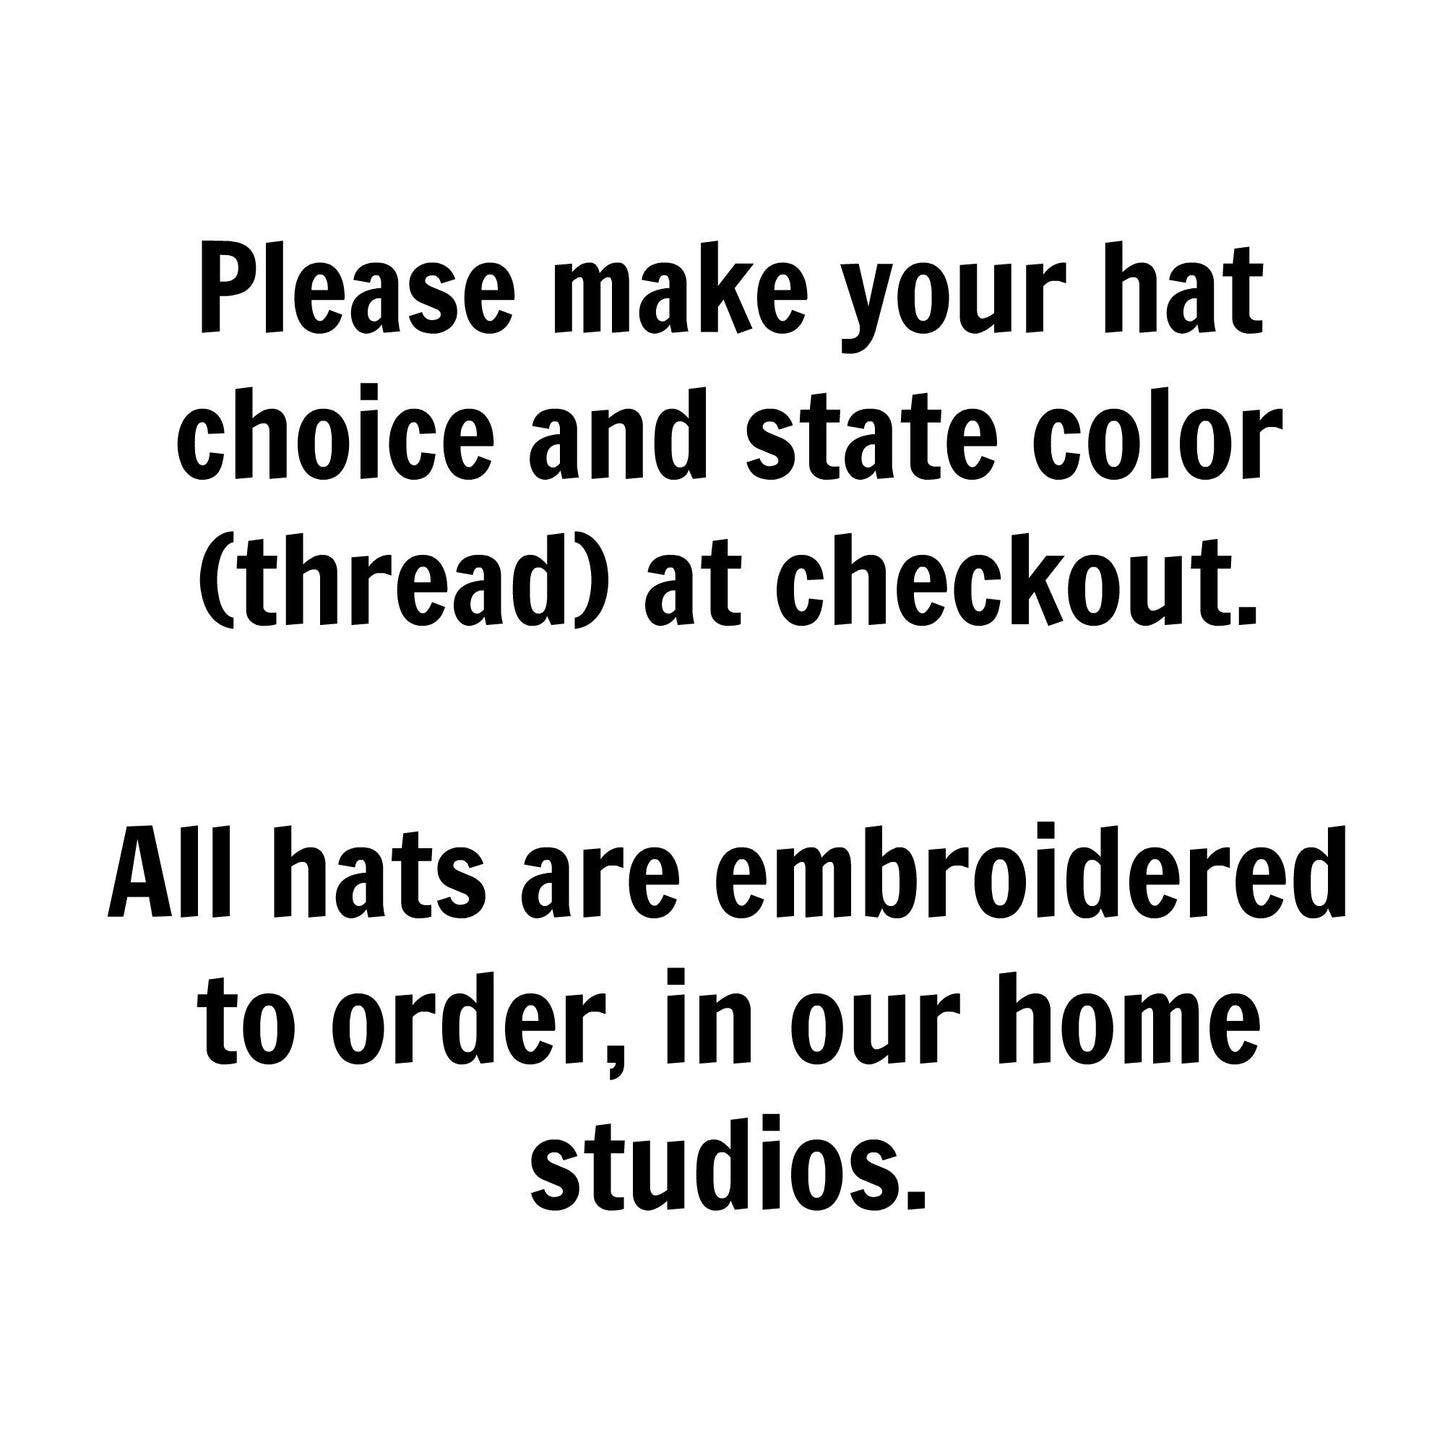 Louisiana Hat - Distressed Snapback Trucker Hat - Louisiana State Outline - Many Colors Available